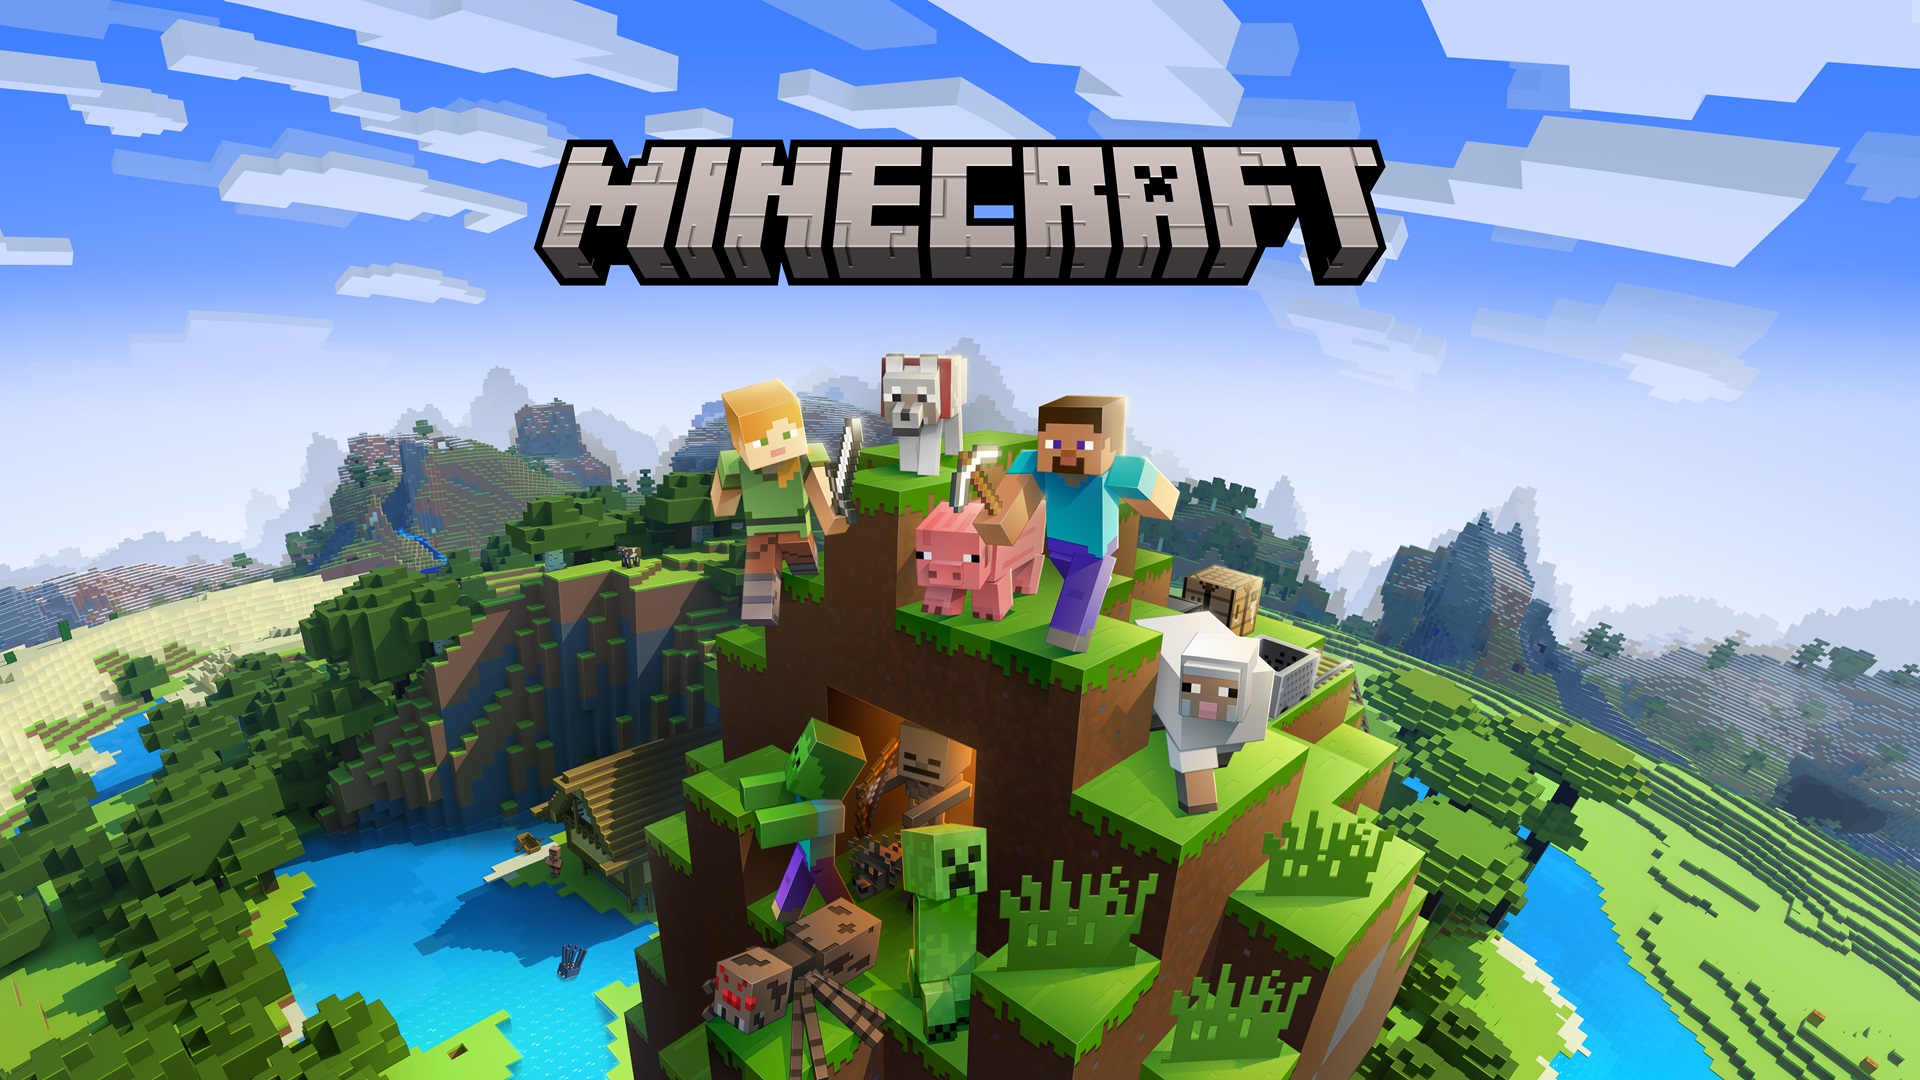 CDKeys.com - Let your imagination run wild in Minecraft for Xbox one, now  81% off in today's Daily Deal. 🔧 ⛏